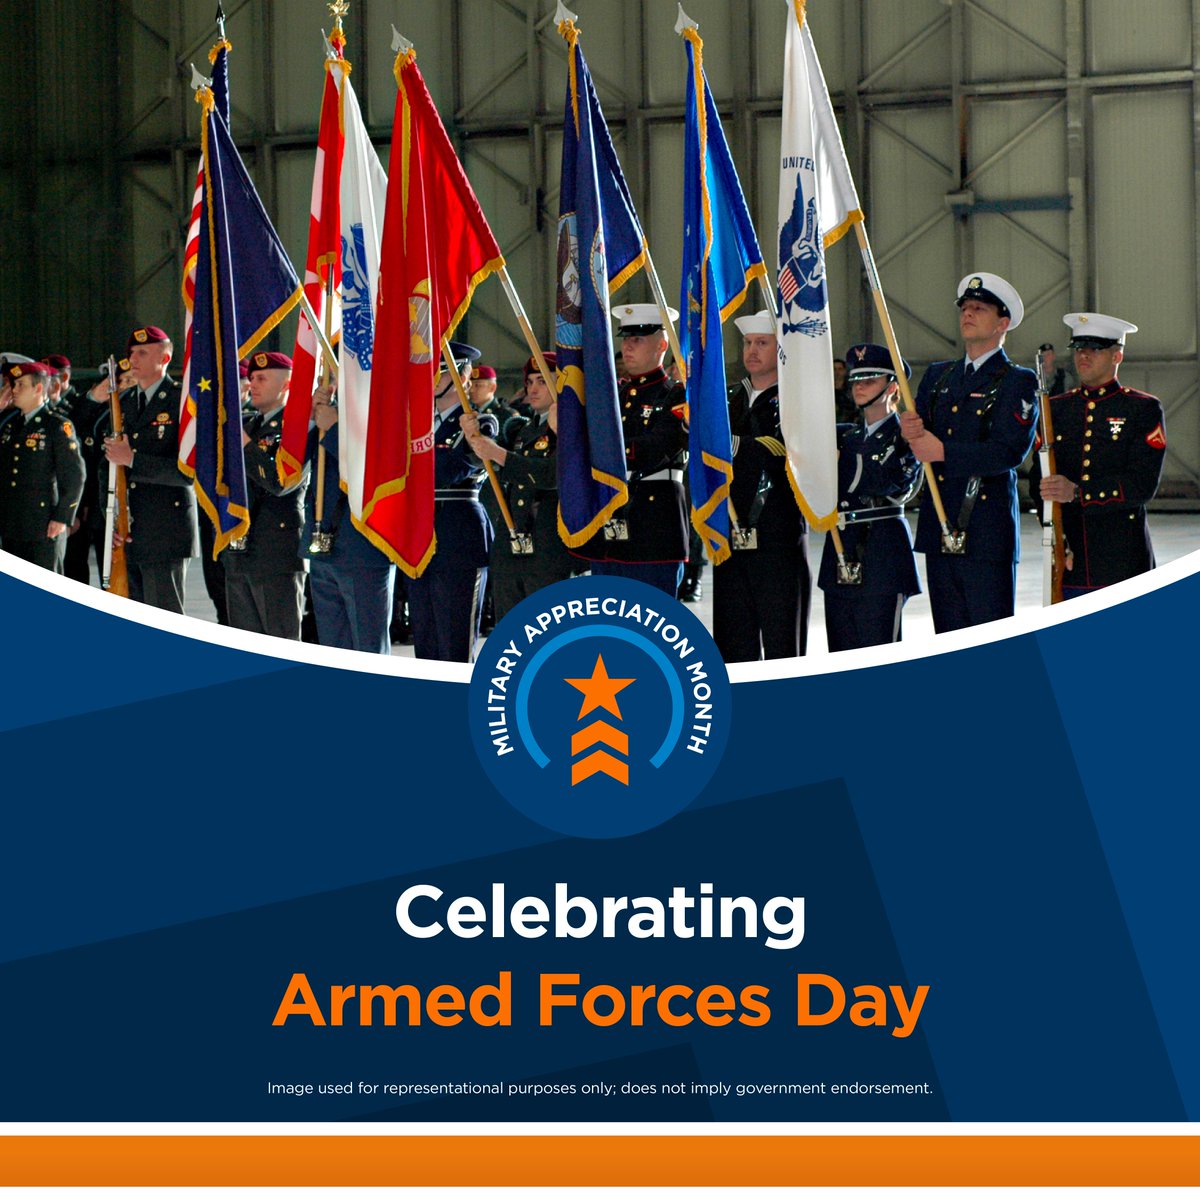 Your commitment always inspires ours, but especially today on #ArmedForcesDay! To our servicemembers of the past and present, we are saluting you today. “Thank you” will never be enough! #MissionBeyondThanks